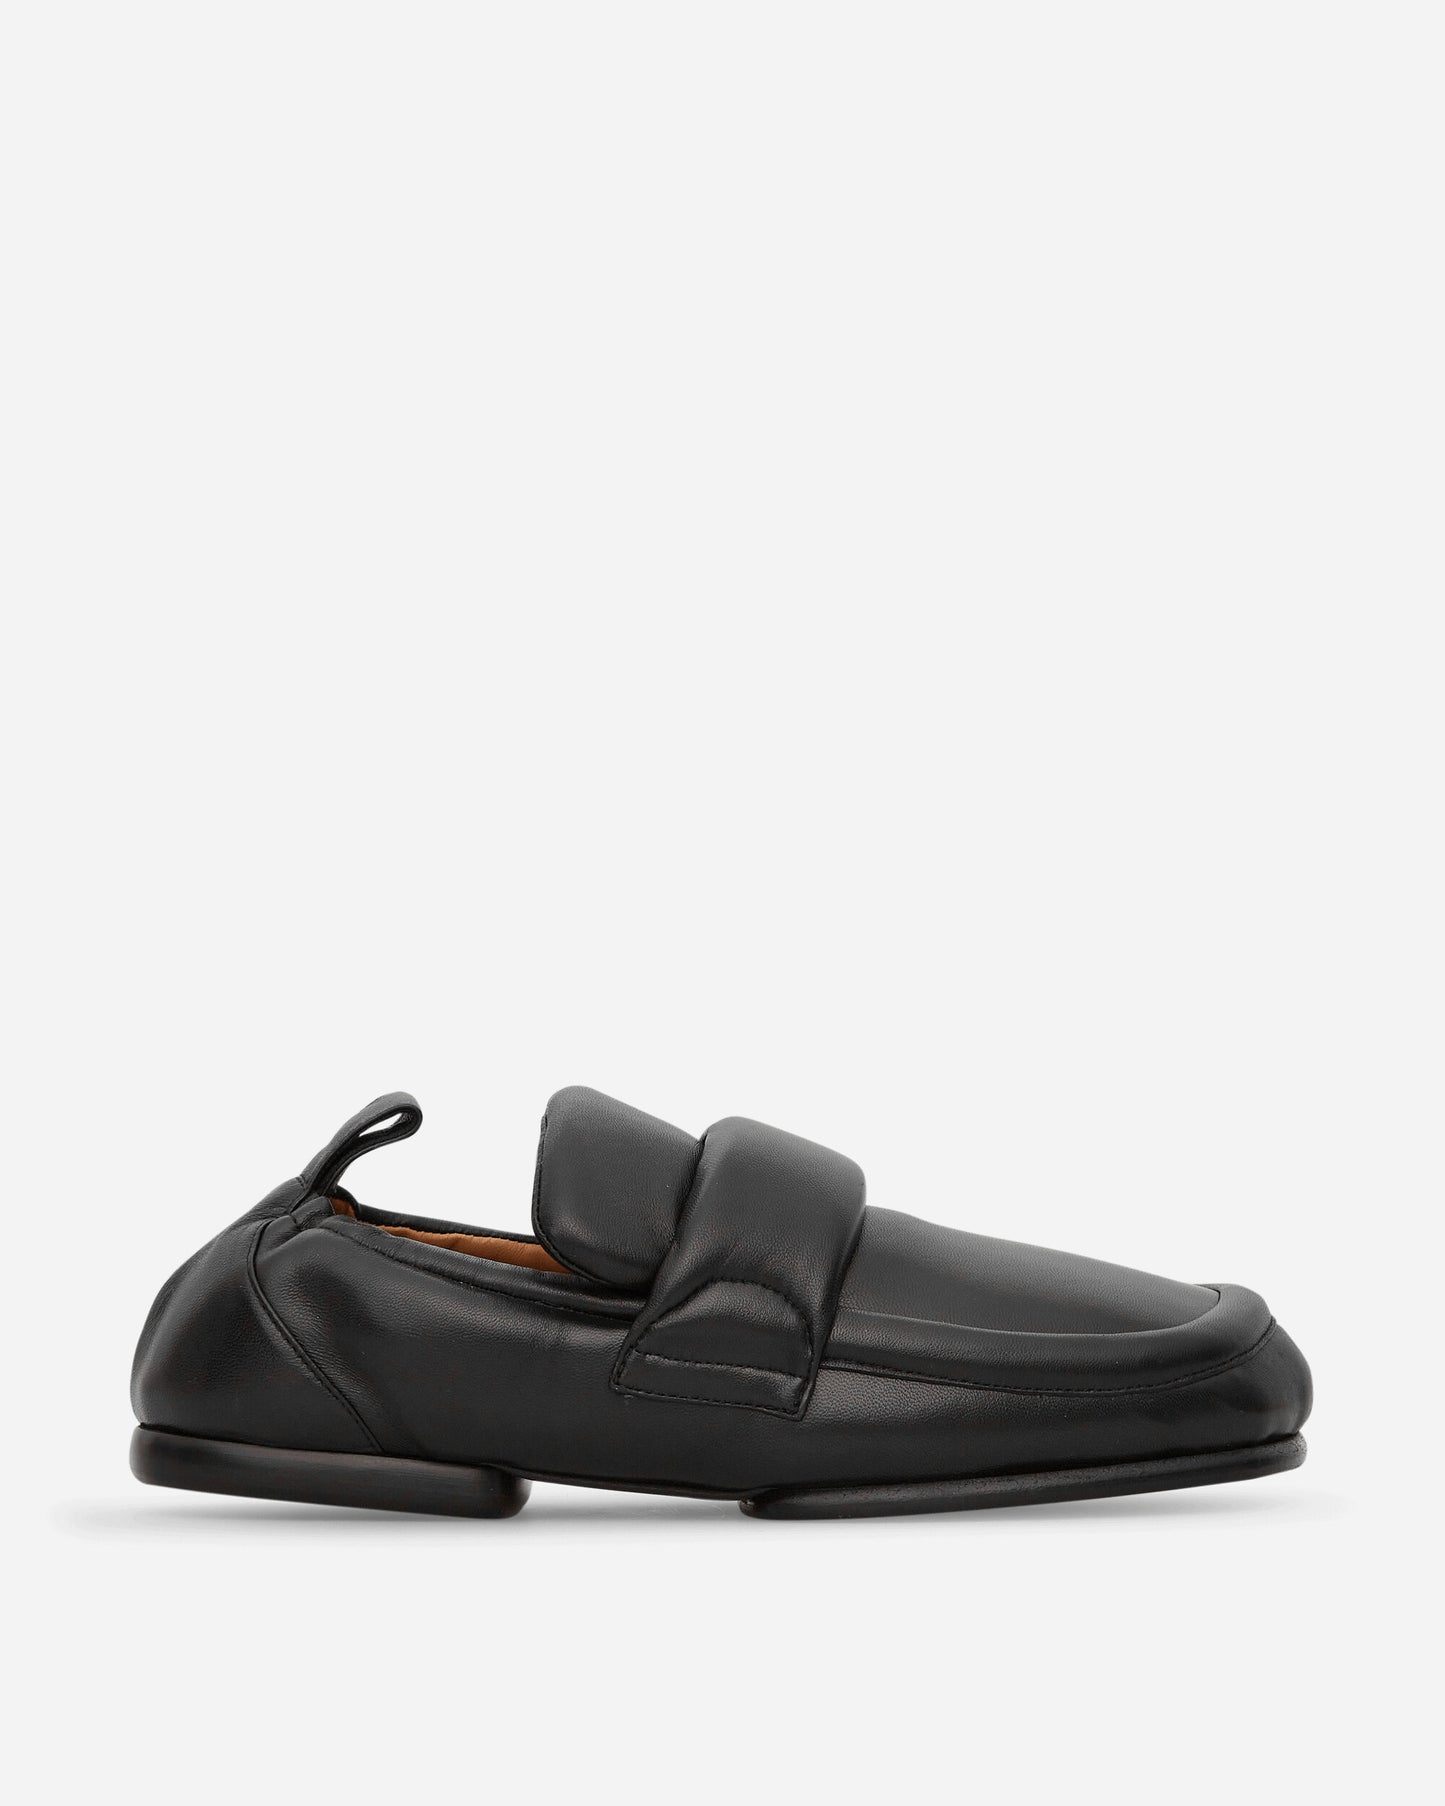 Dries Van Noten Padded Leather Loafers Black Classic Shoes Loafers DU-151 900